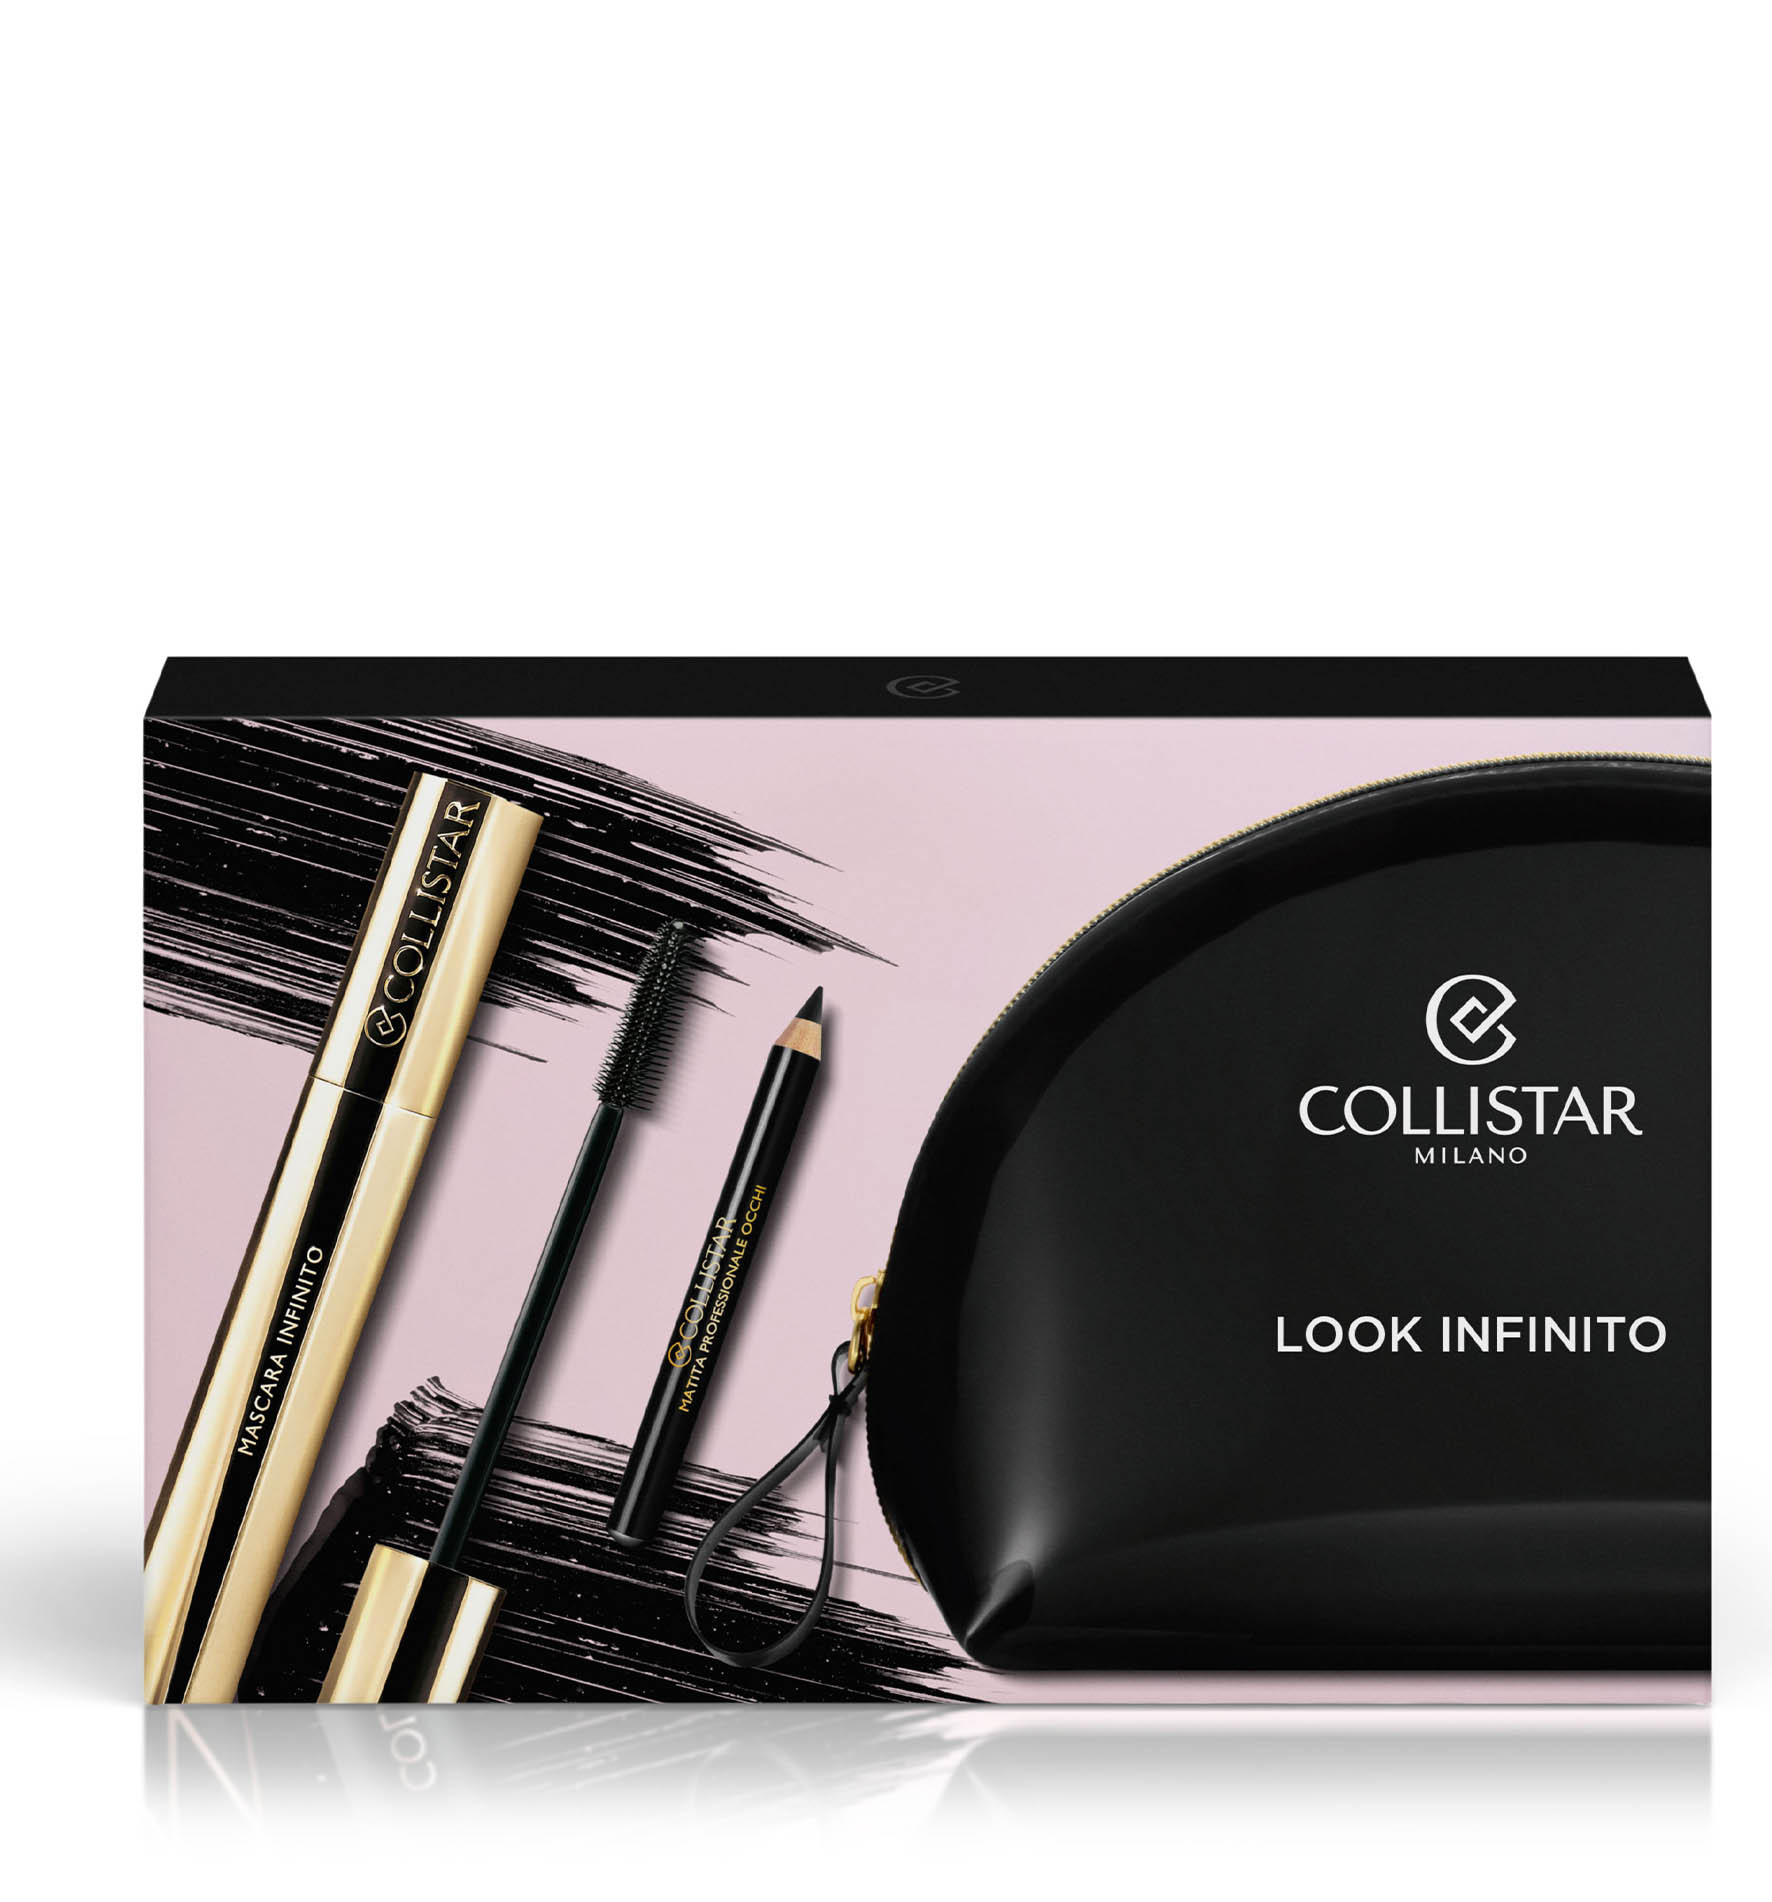 SET LOOK INFINITO - Giftsets | Collistar - Shop Online Ufficiale